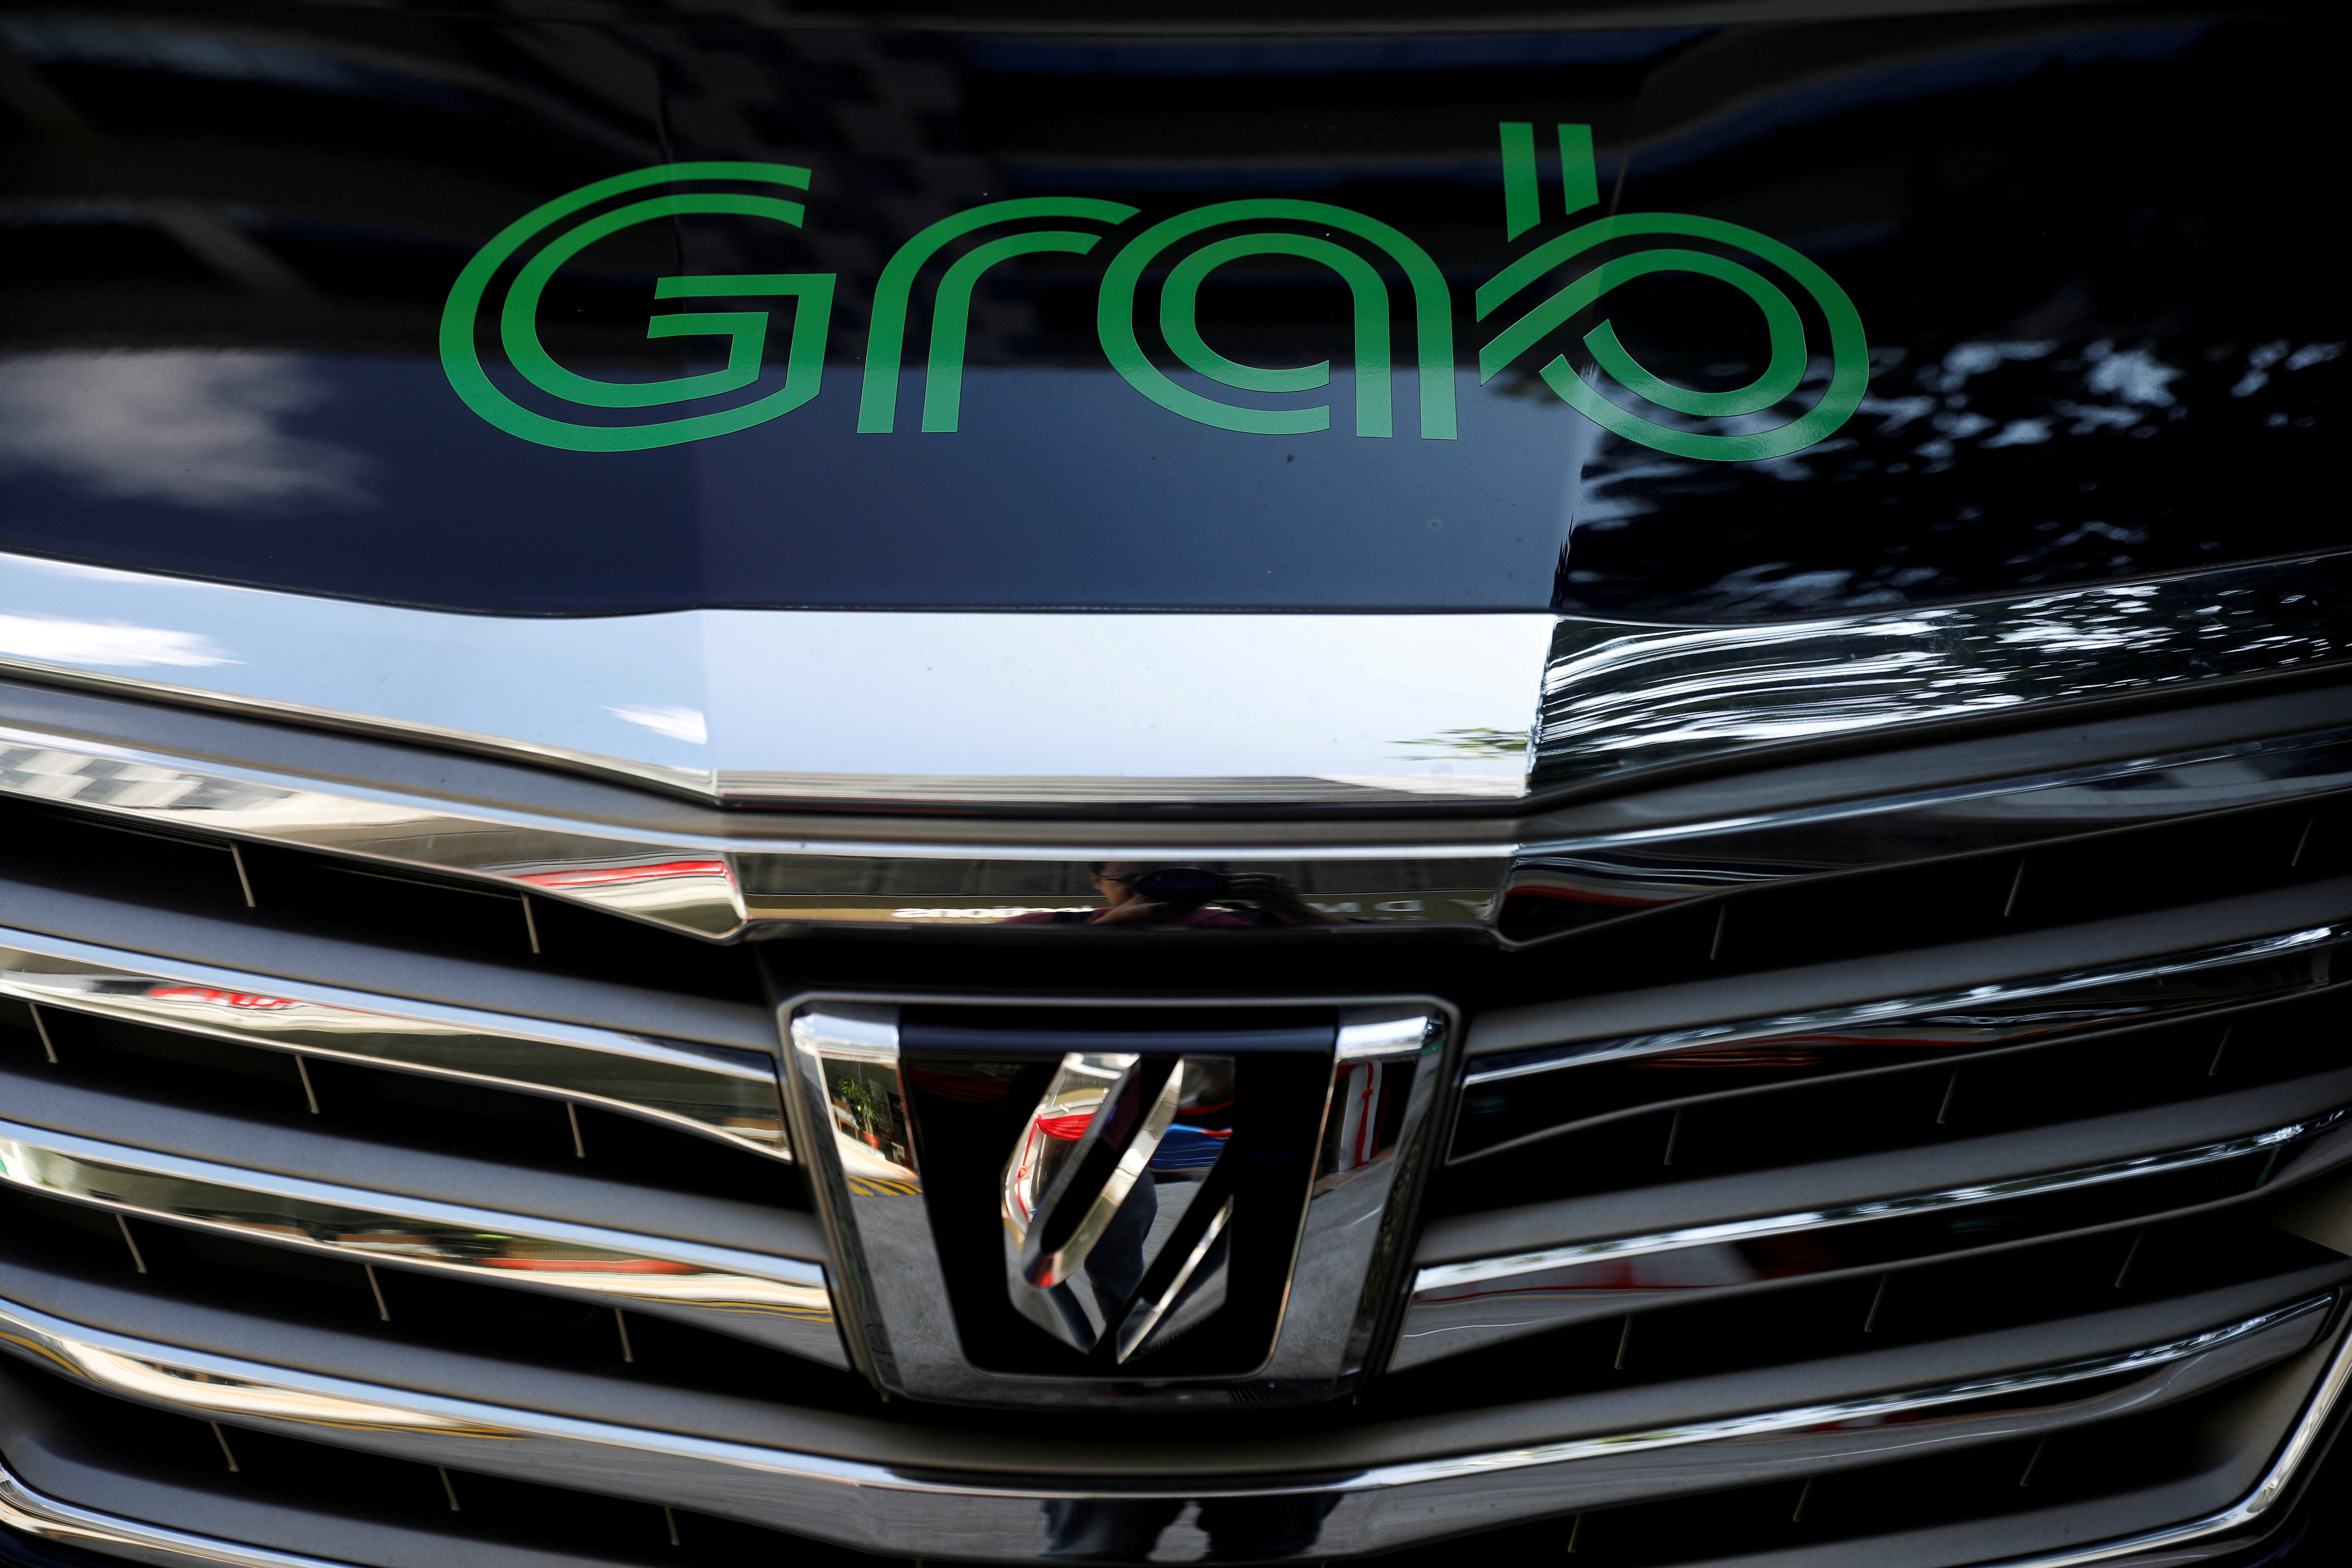 A Grab vehicle is pictured in Singapore